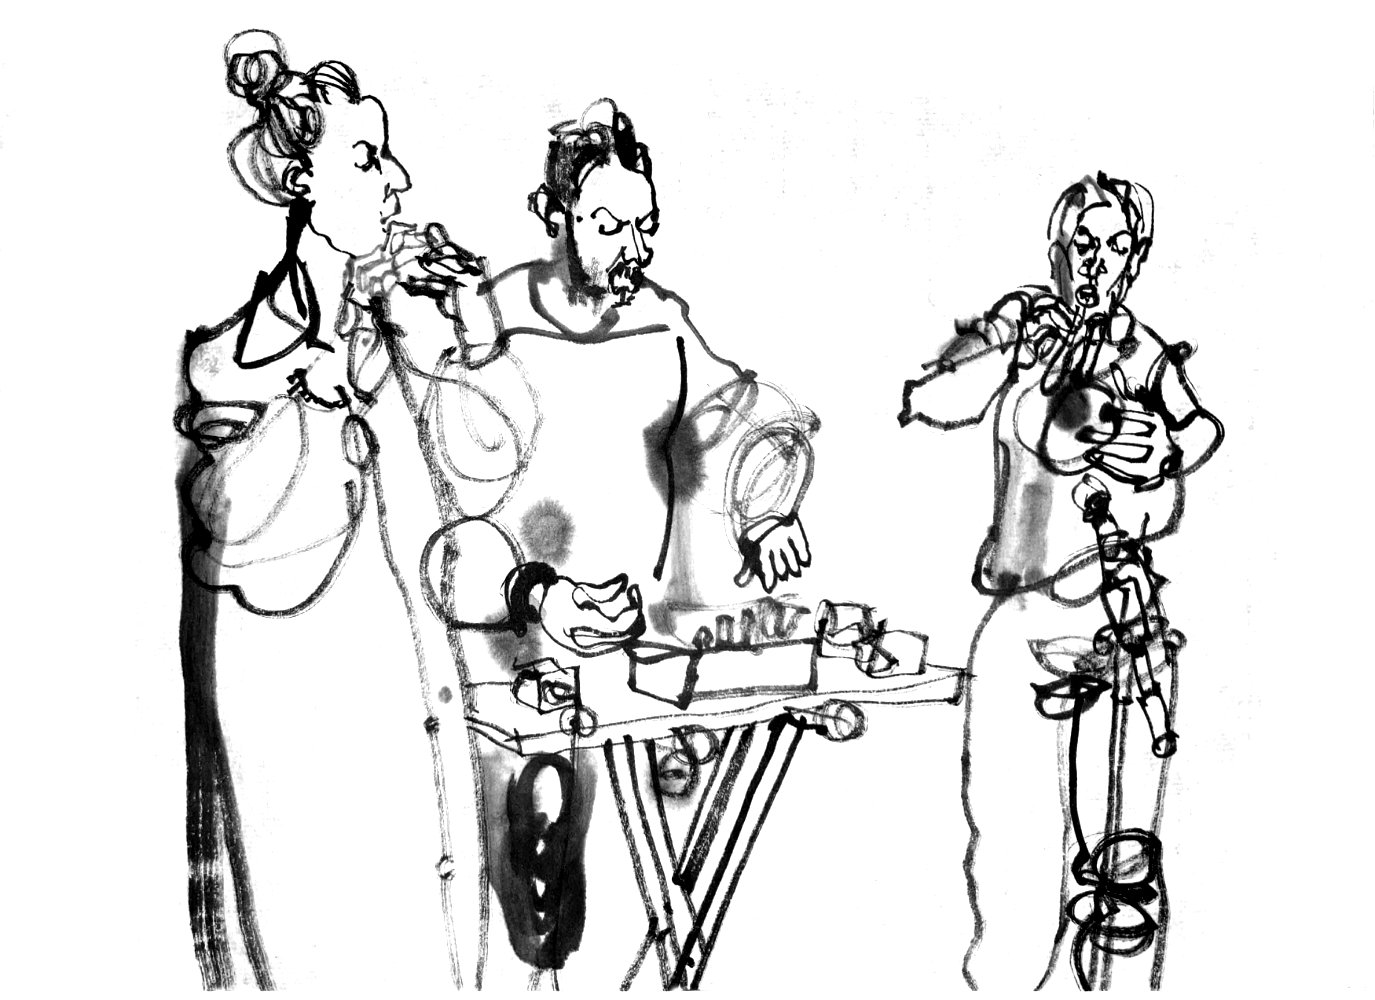 Ink drawing of three musicians, a woman on flute, a man at a desk with electronics, and a woman on trumpet.